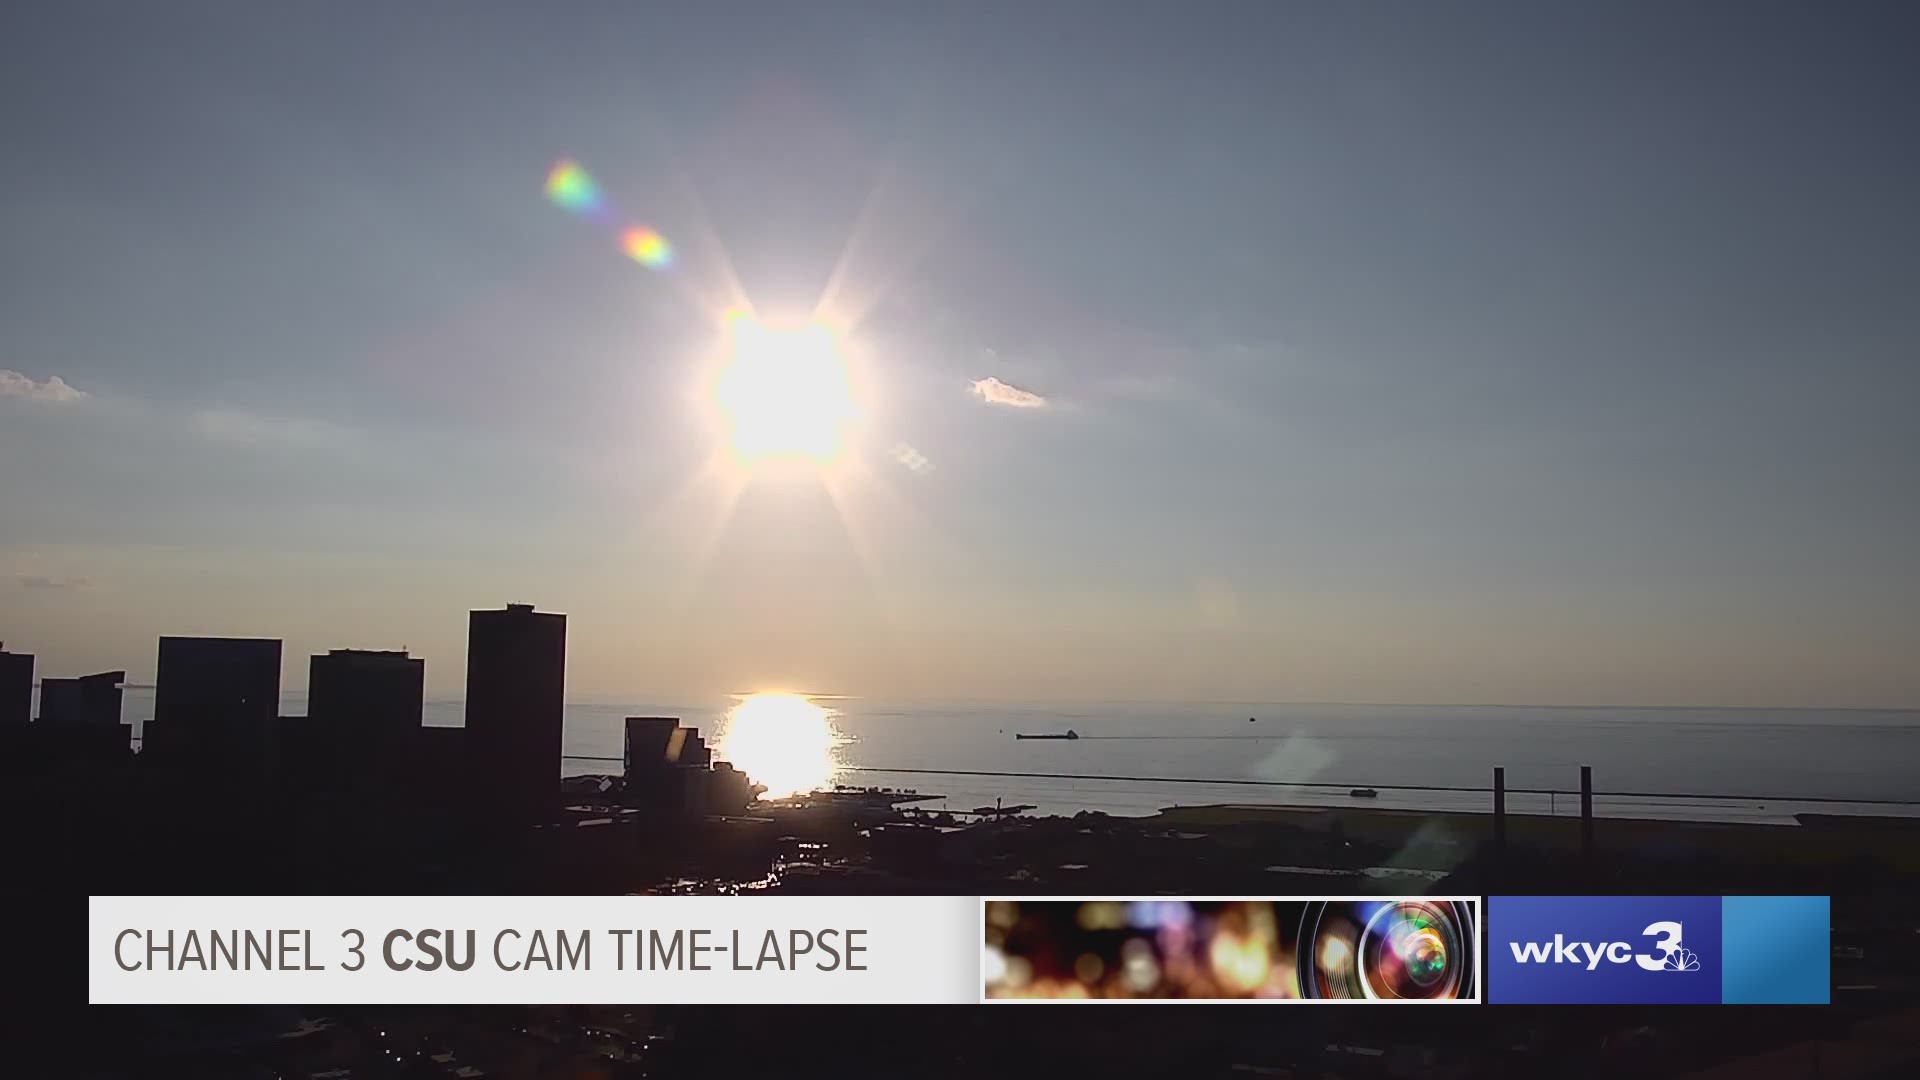 Tonight's Cleveland sunset time-lapse was a beauty from the Channel 3 CSU Cam. #3weather